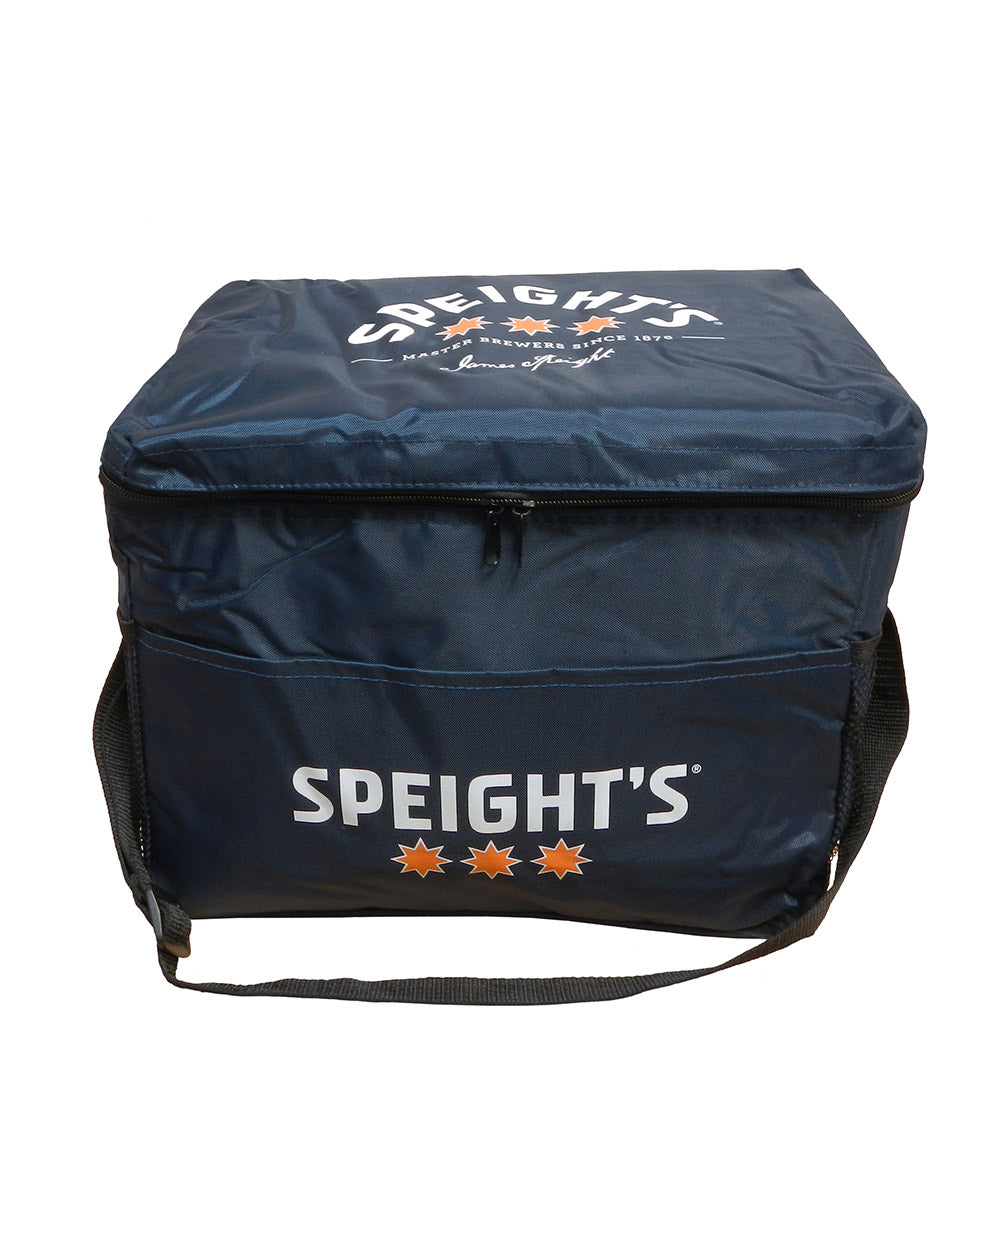 Speight's Cooler Bag 24 -  Beer Gear Apparel & Merchandise - Speights - Lion Red - VB - Tokyo Dy merch